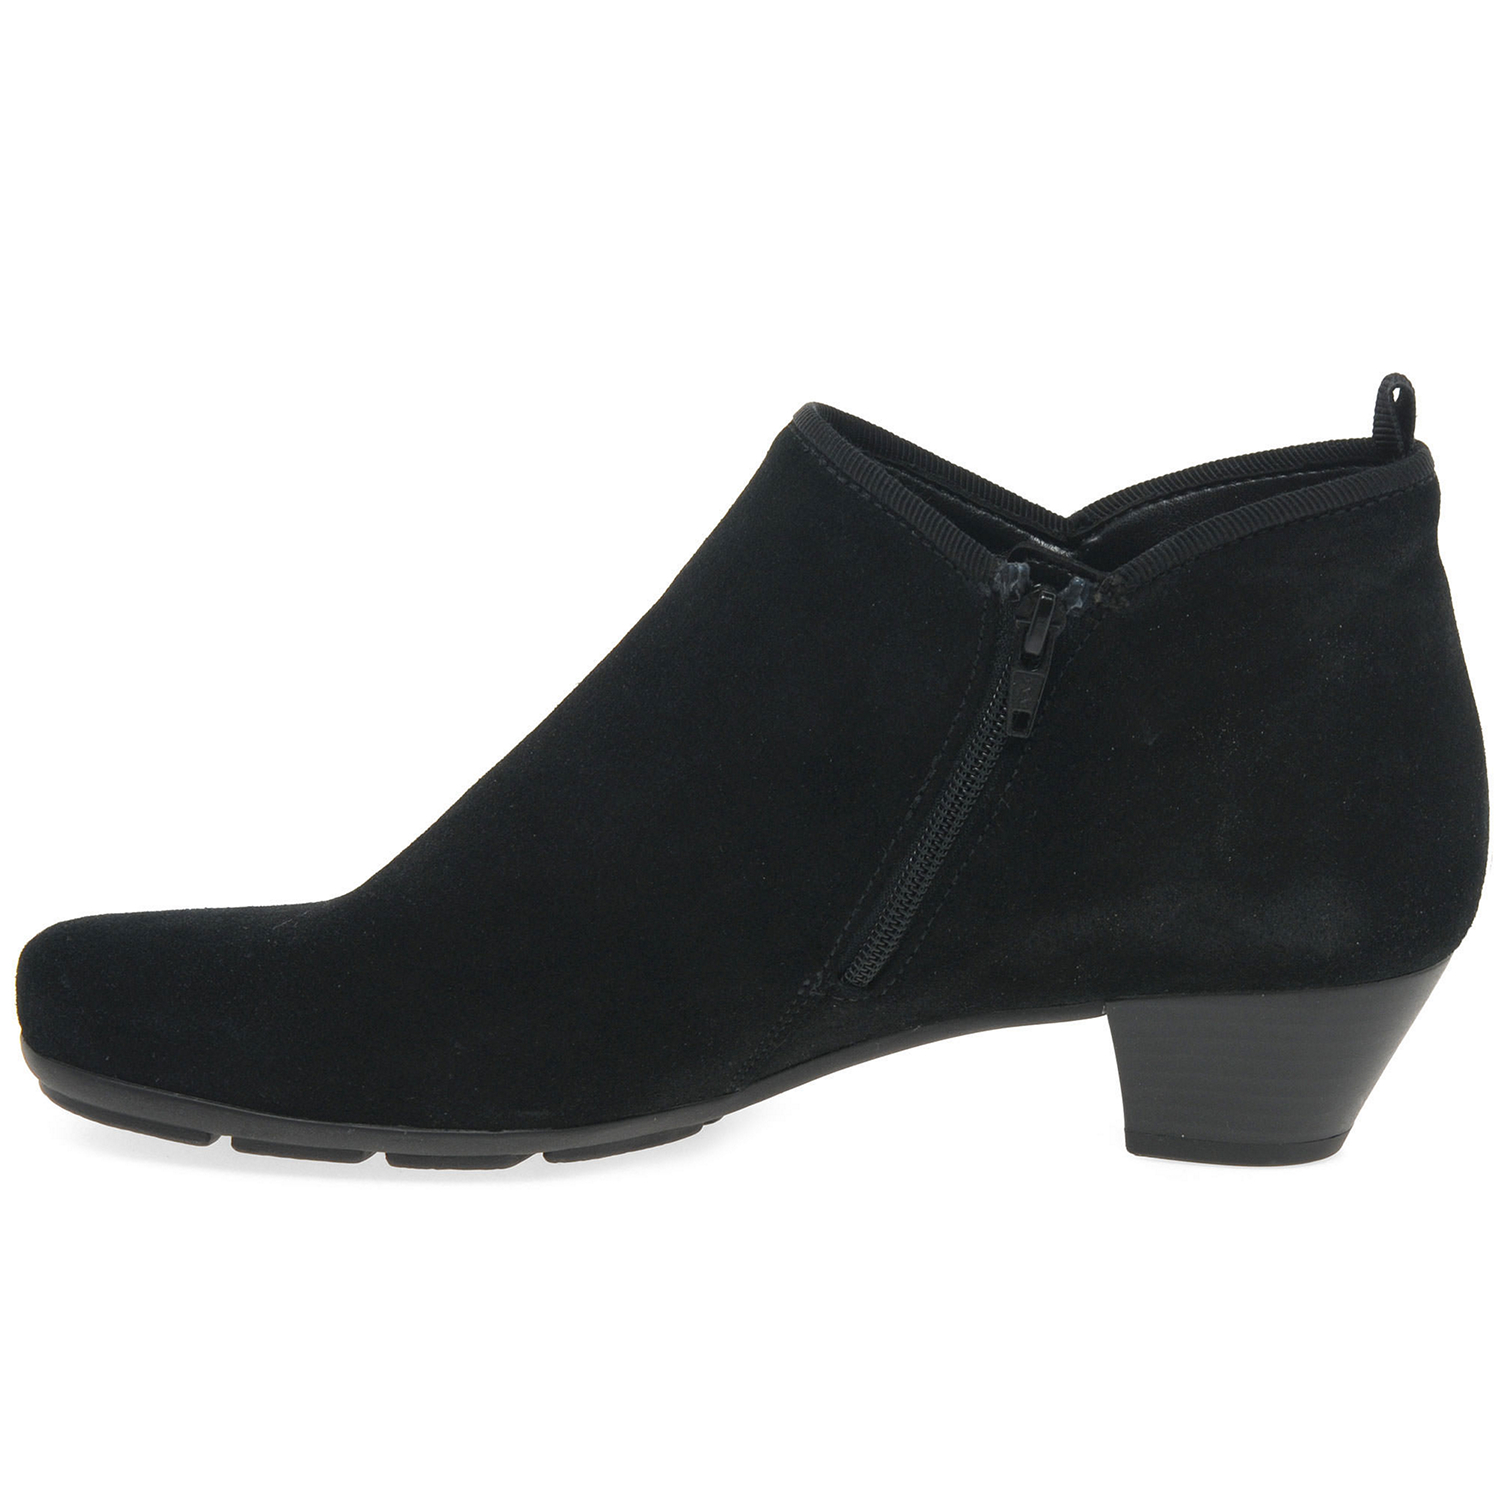 Trudy Ankle Boot